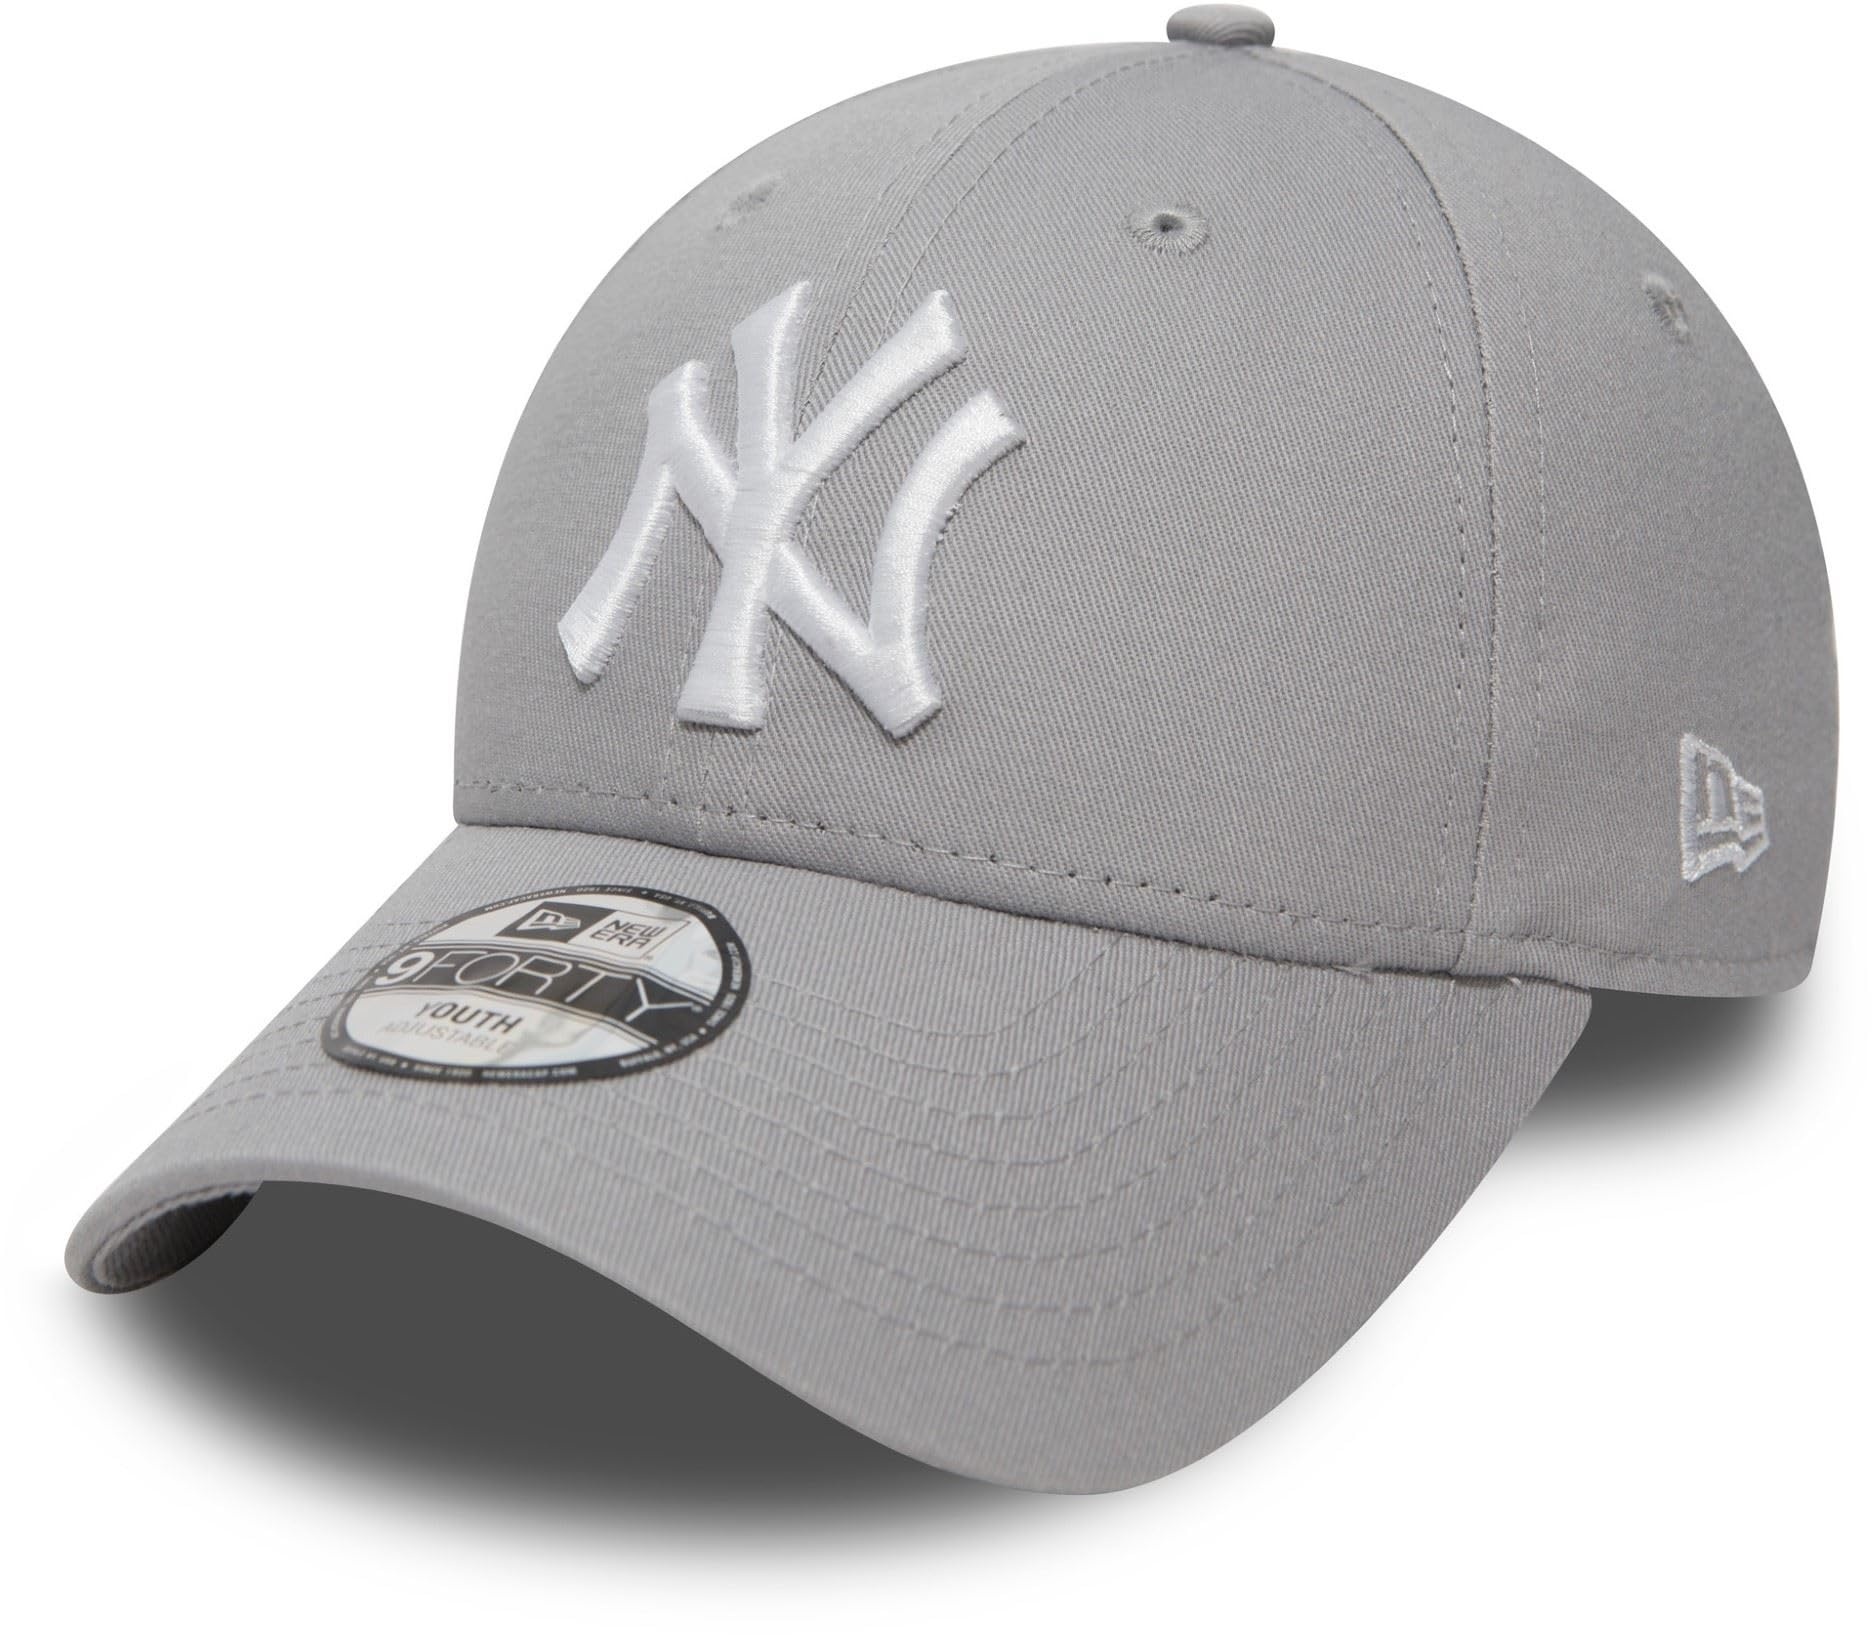 New Era New York Yankees MLB League Gray 9Forty Adjustable Youth Cap - Youth